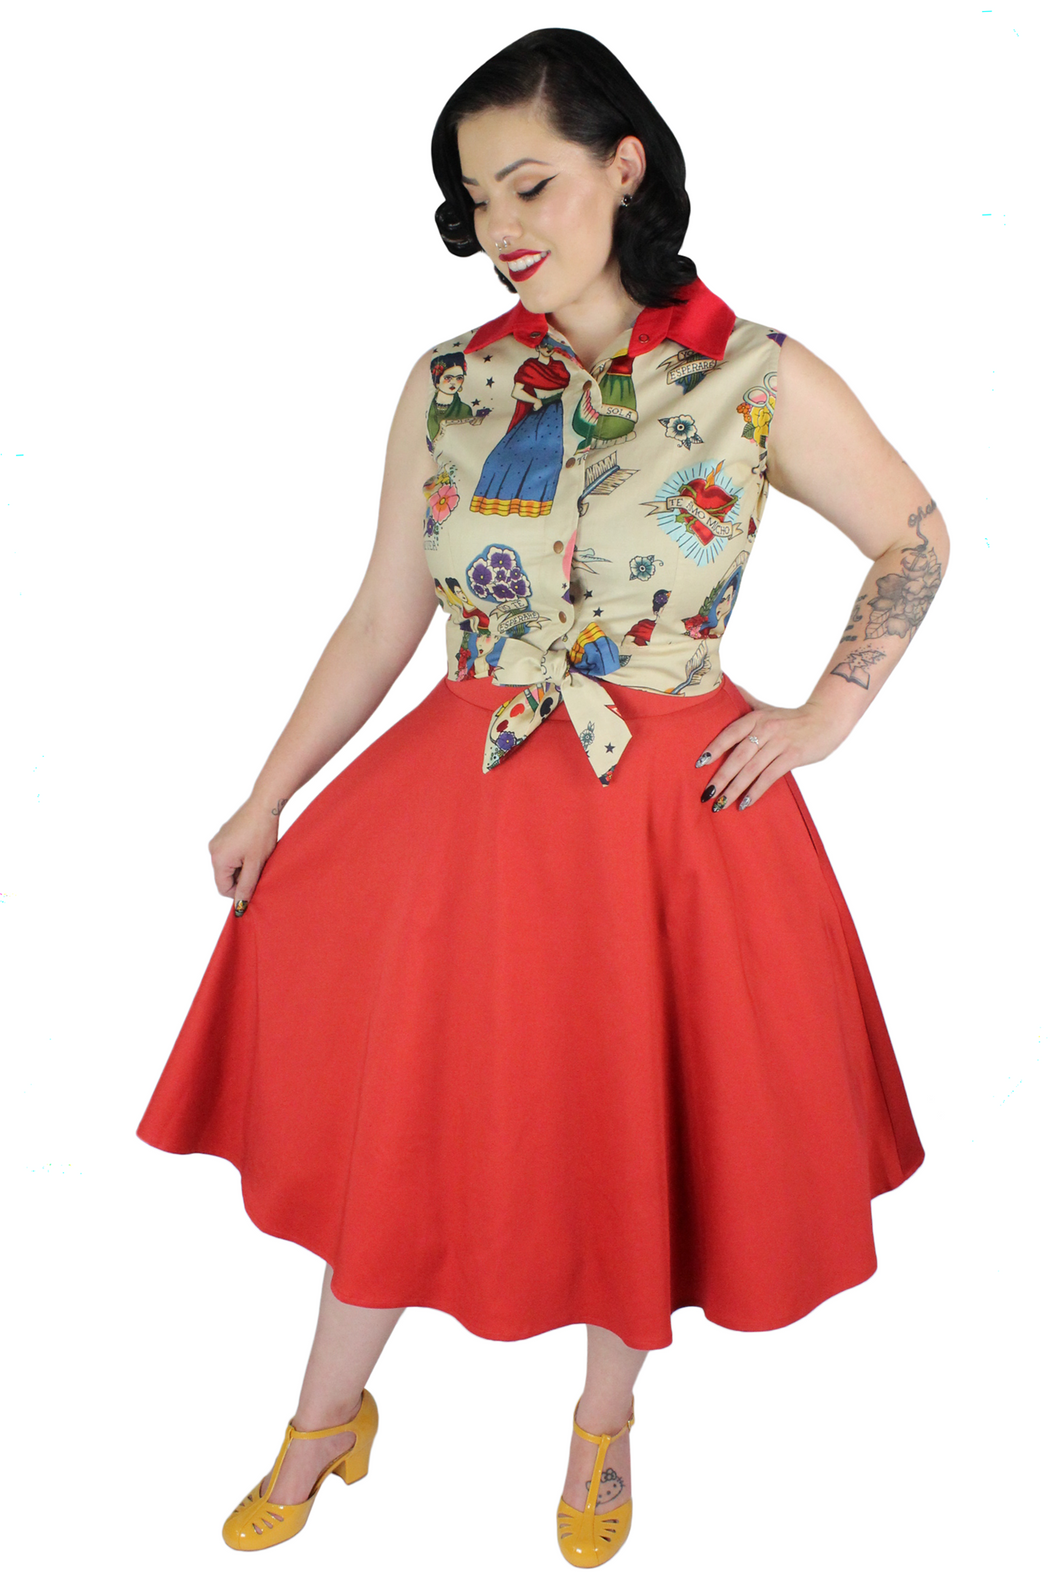 Model wearing the knot top with rustic red circle skirt, Pictured from the side